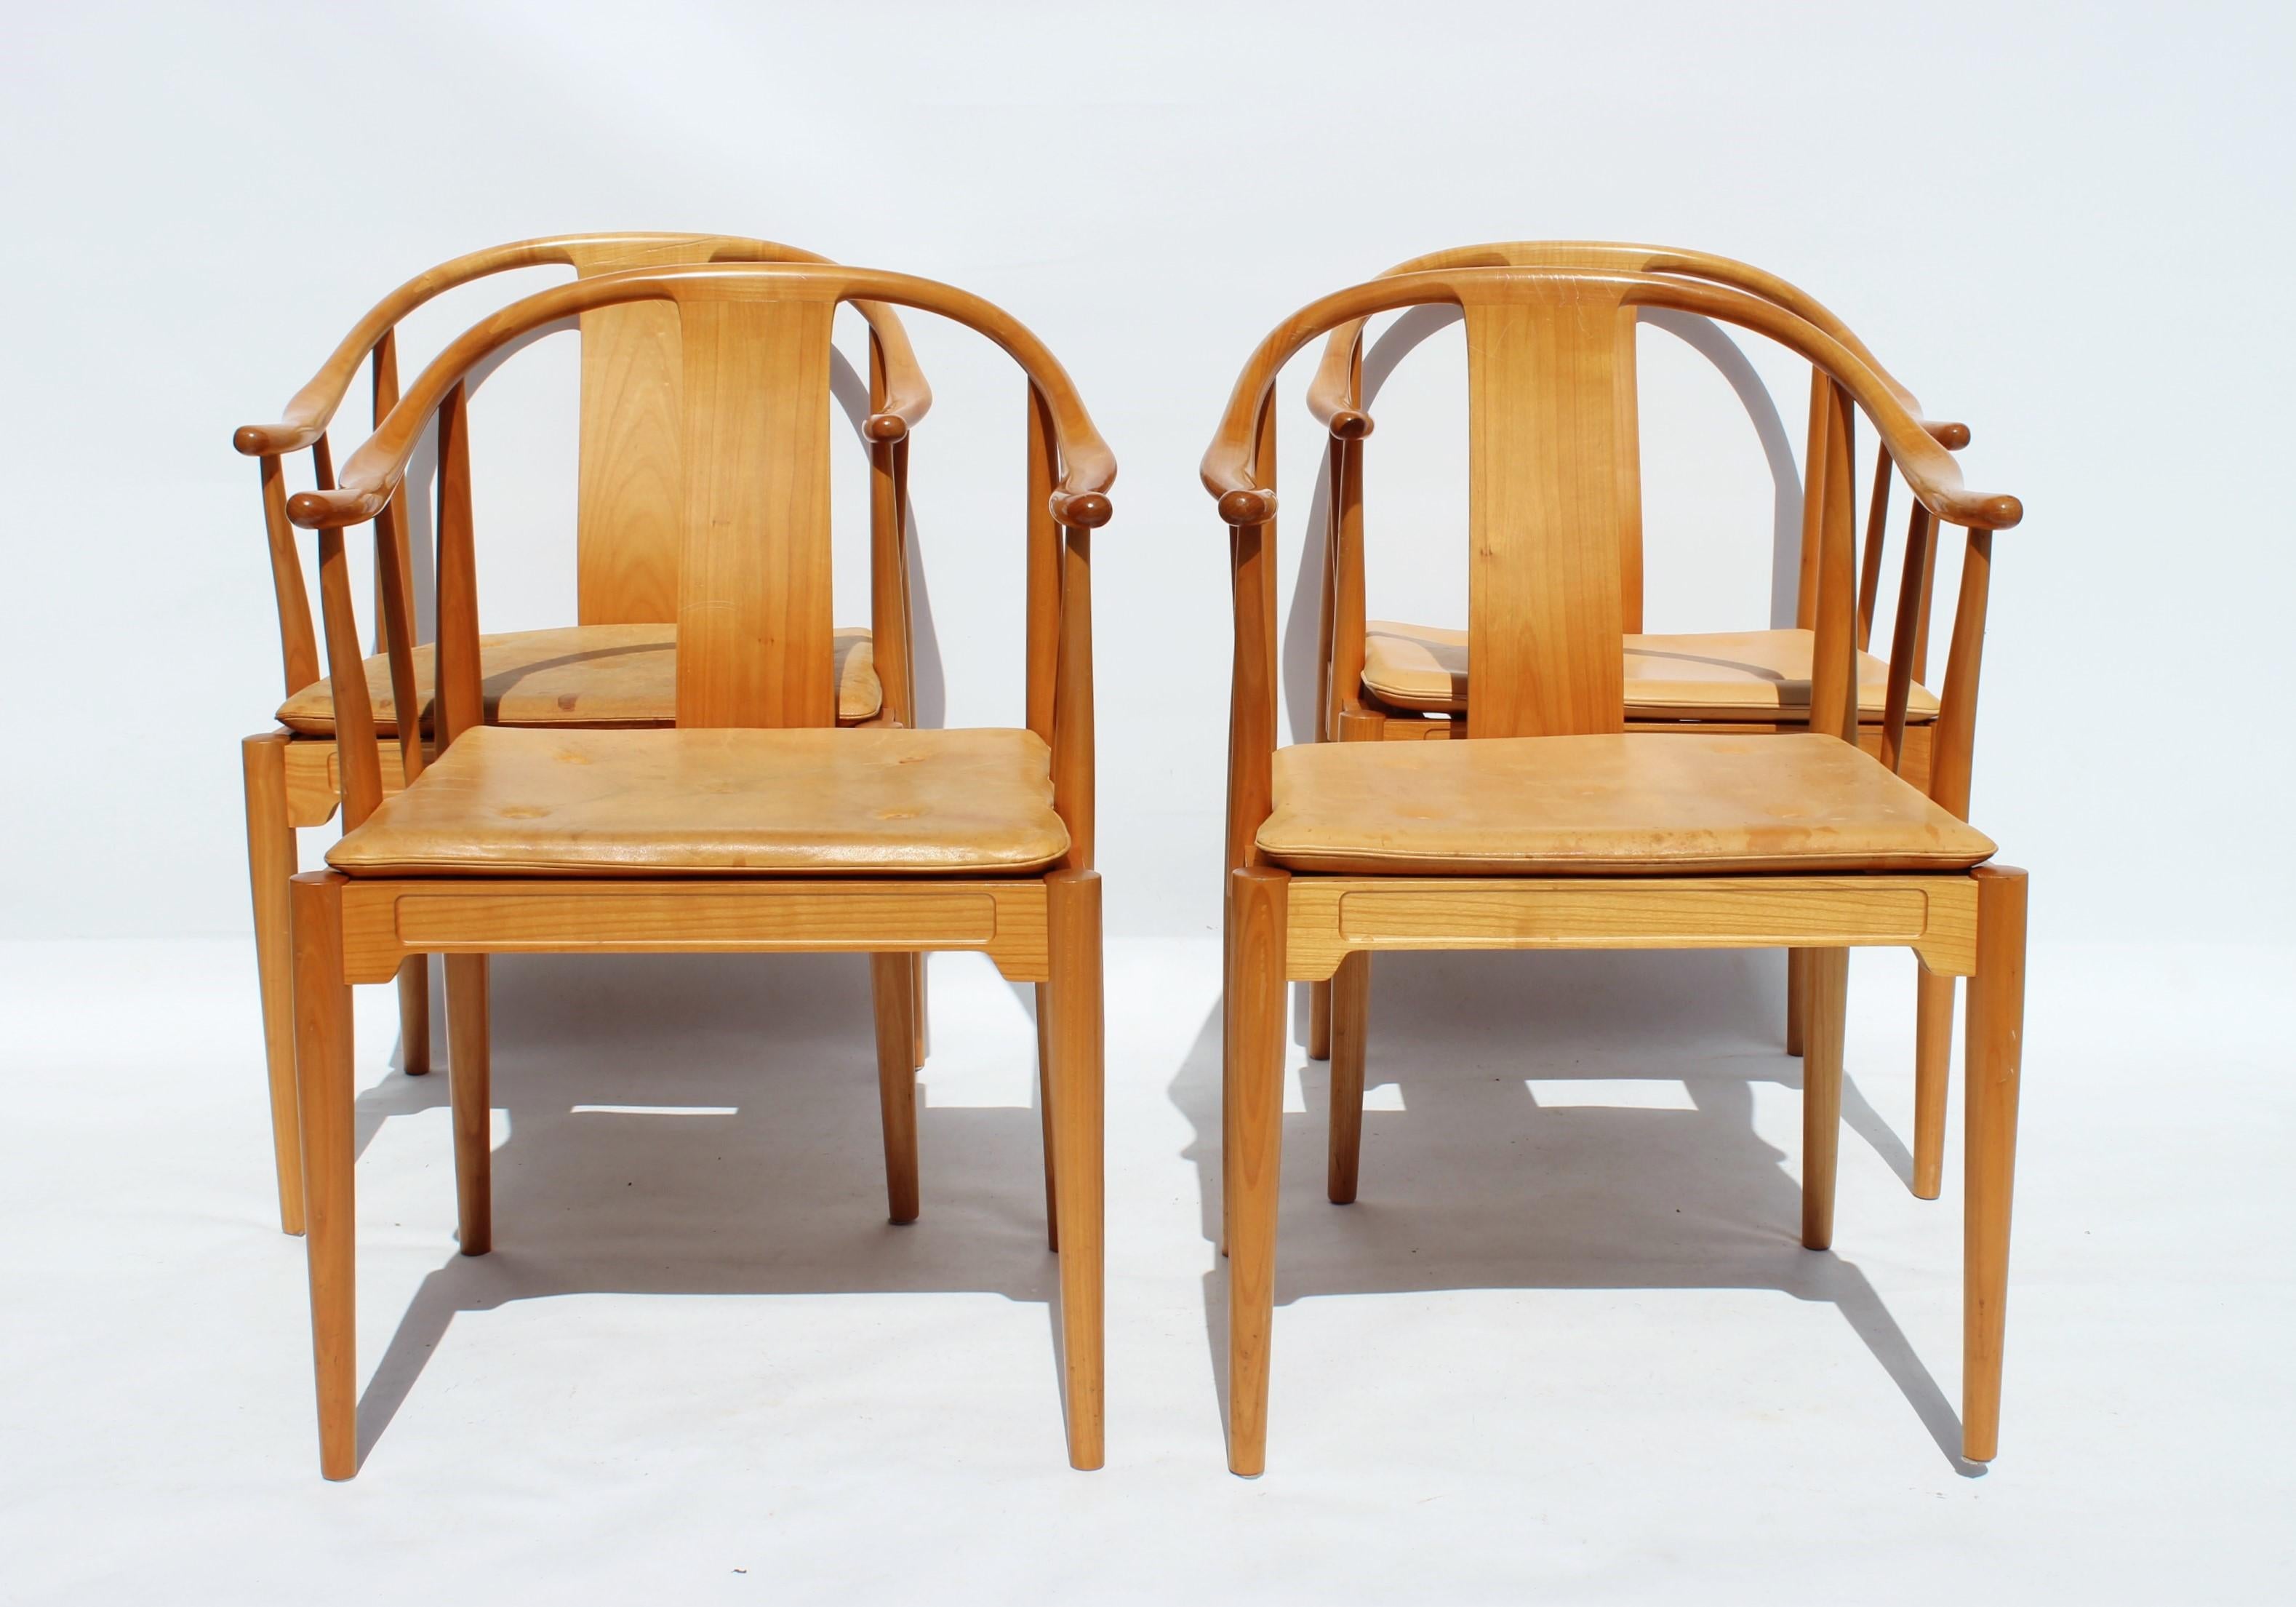 A set of four China chairs, model 4283, designed by Hans J. Wegner in 1944 and manufactured by Fritz Hansen in 1999. The chairs are of cherry and with cushion of patinated leather.